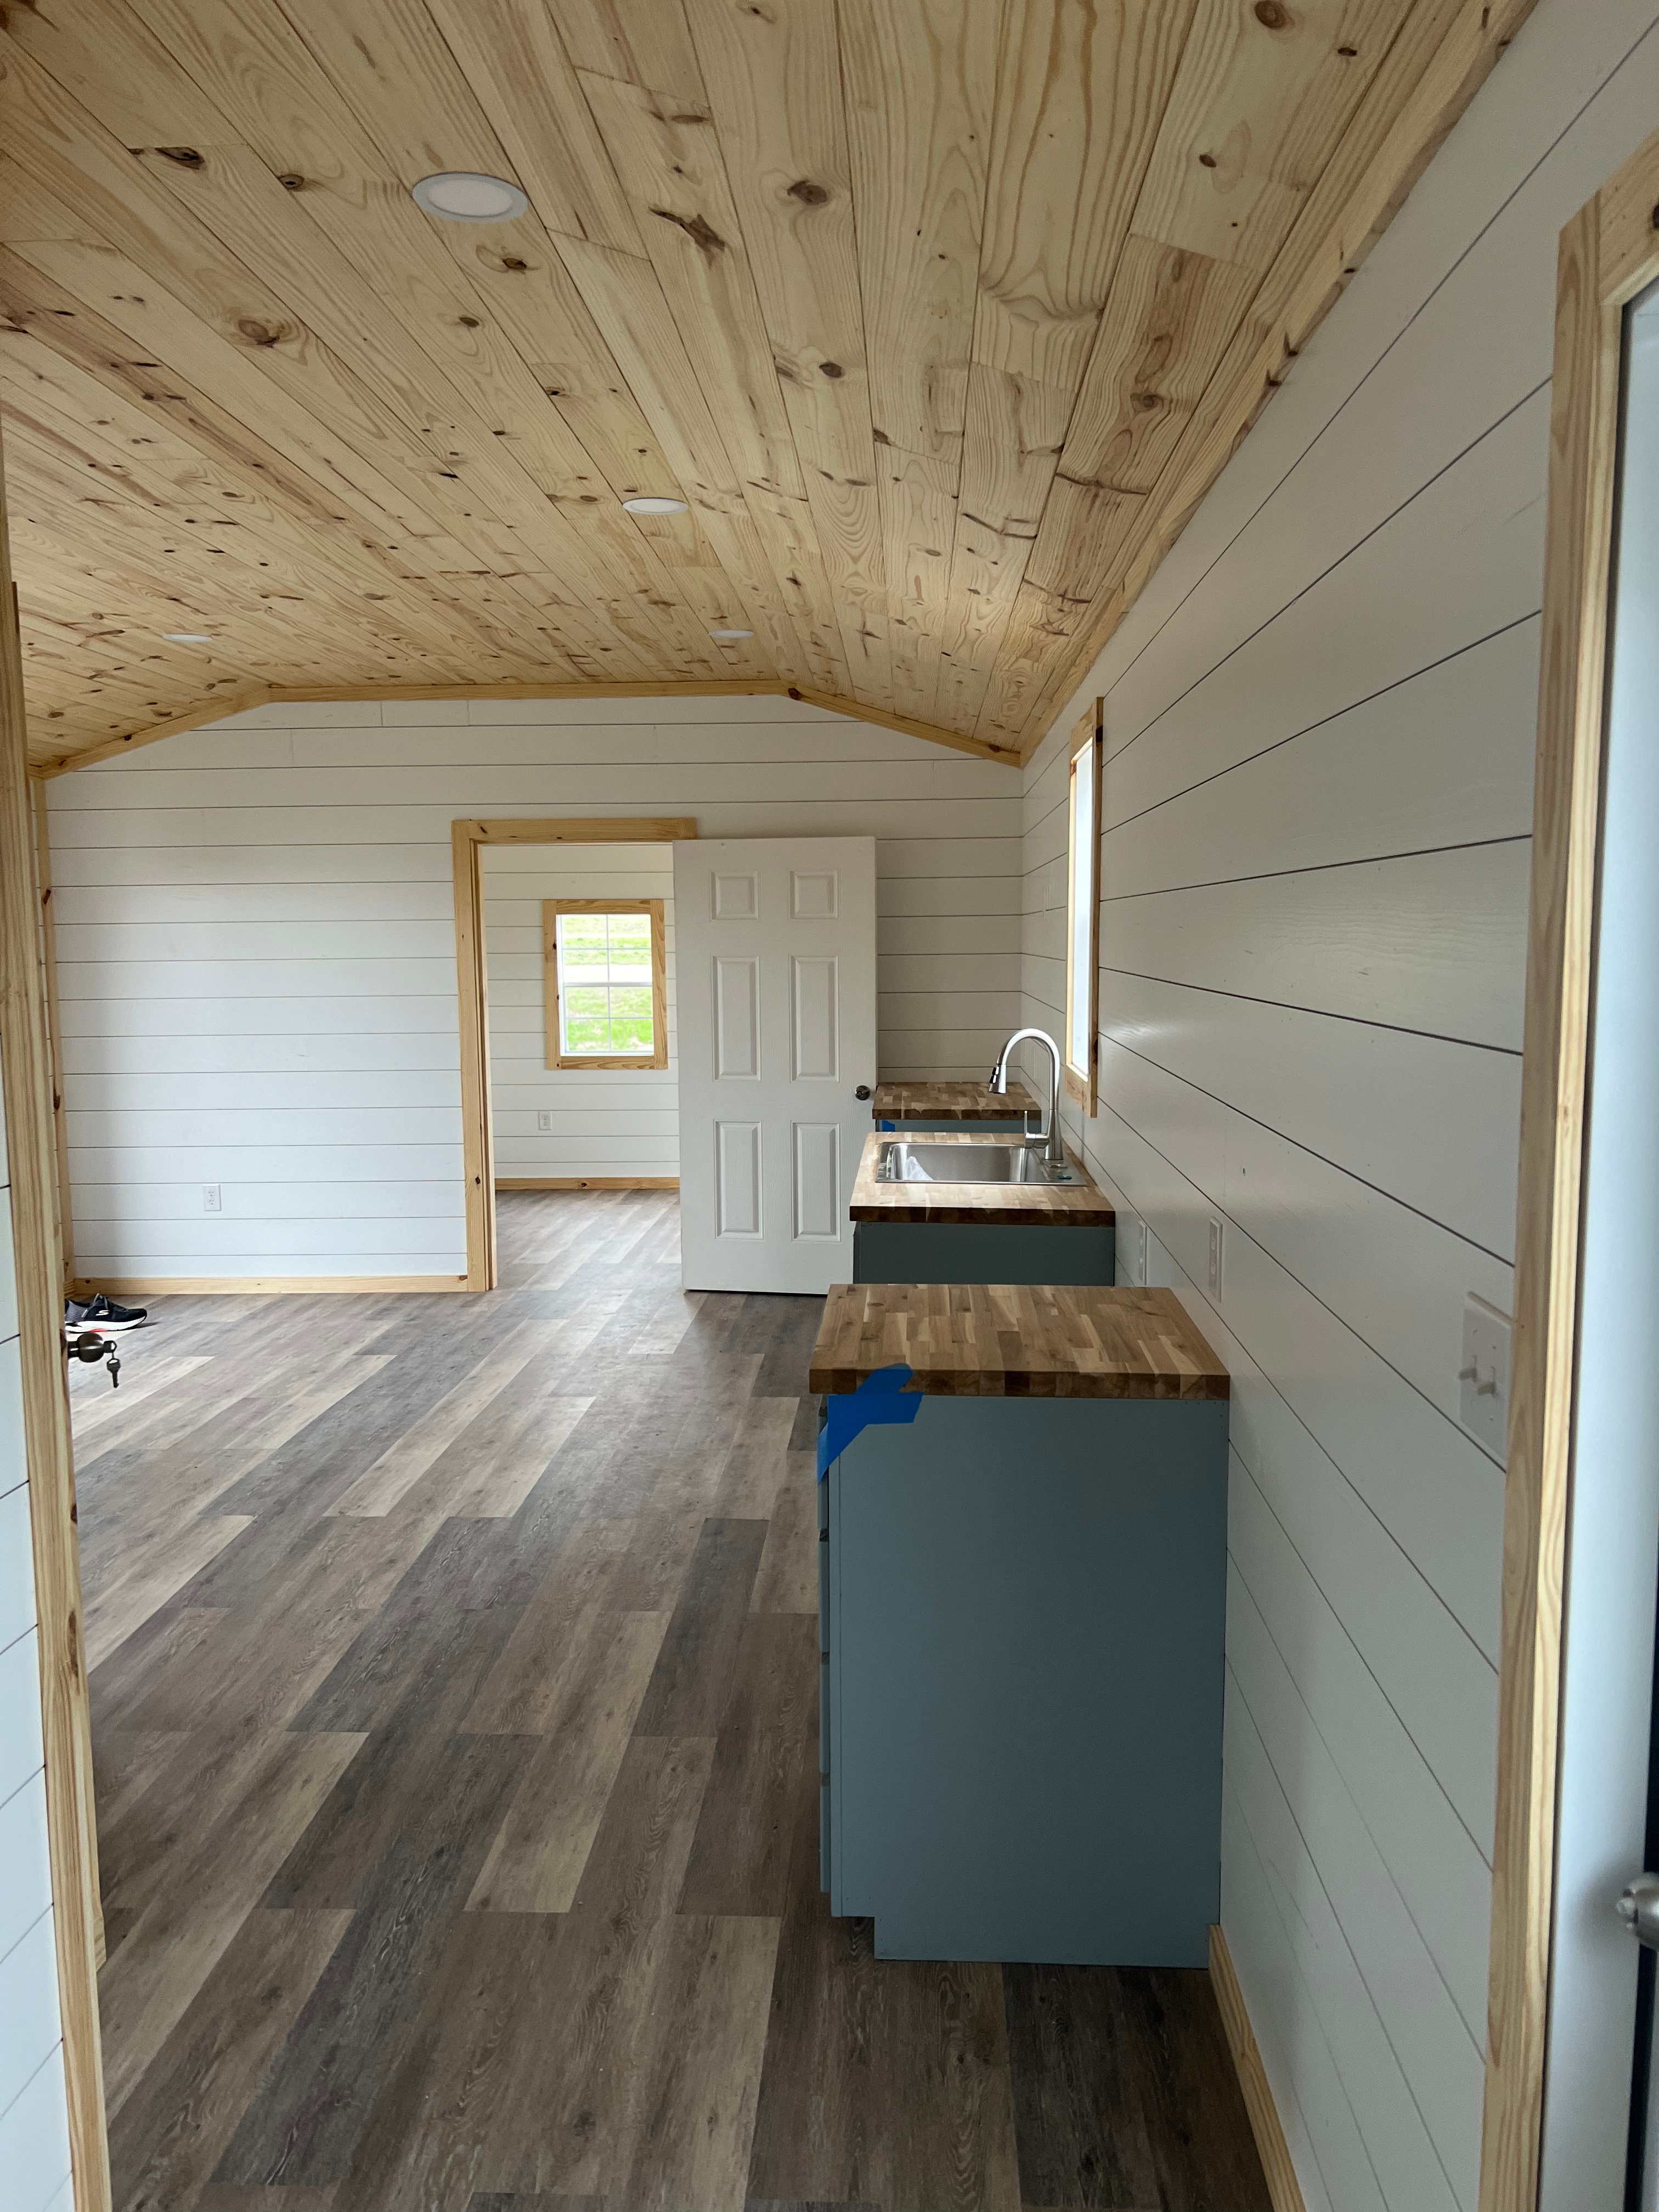 Finished Out Tiny Home